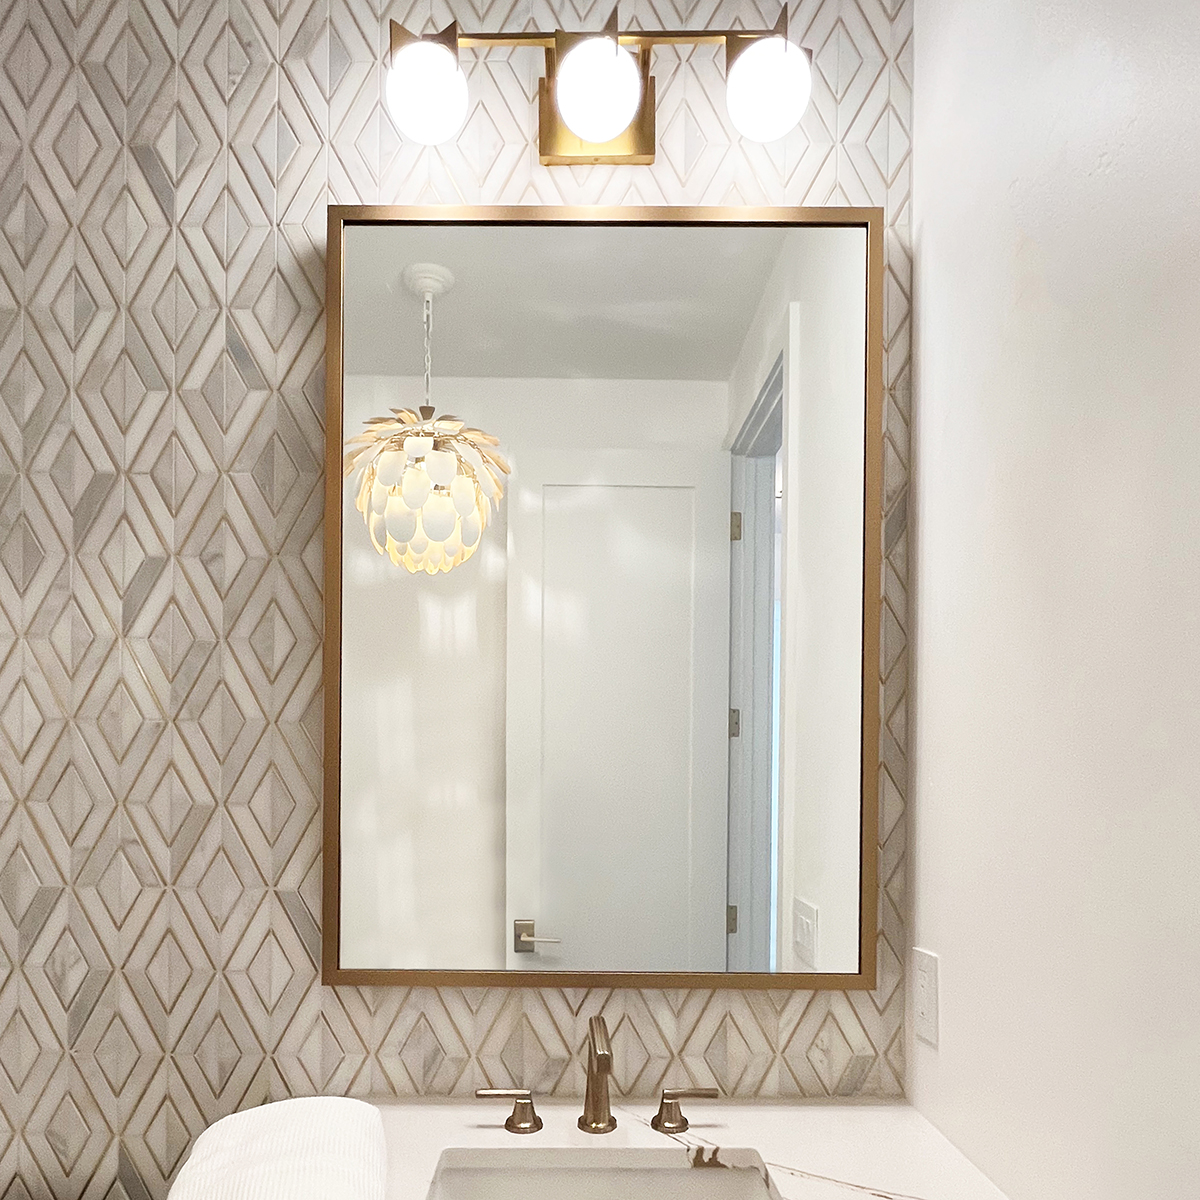 Framed Gold Mirror hanging in bathroom on tiled wall